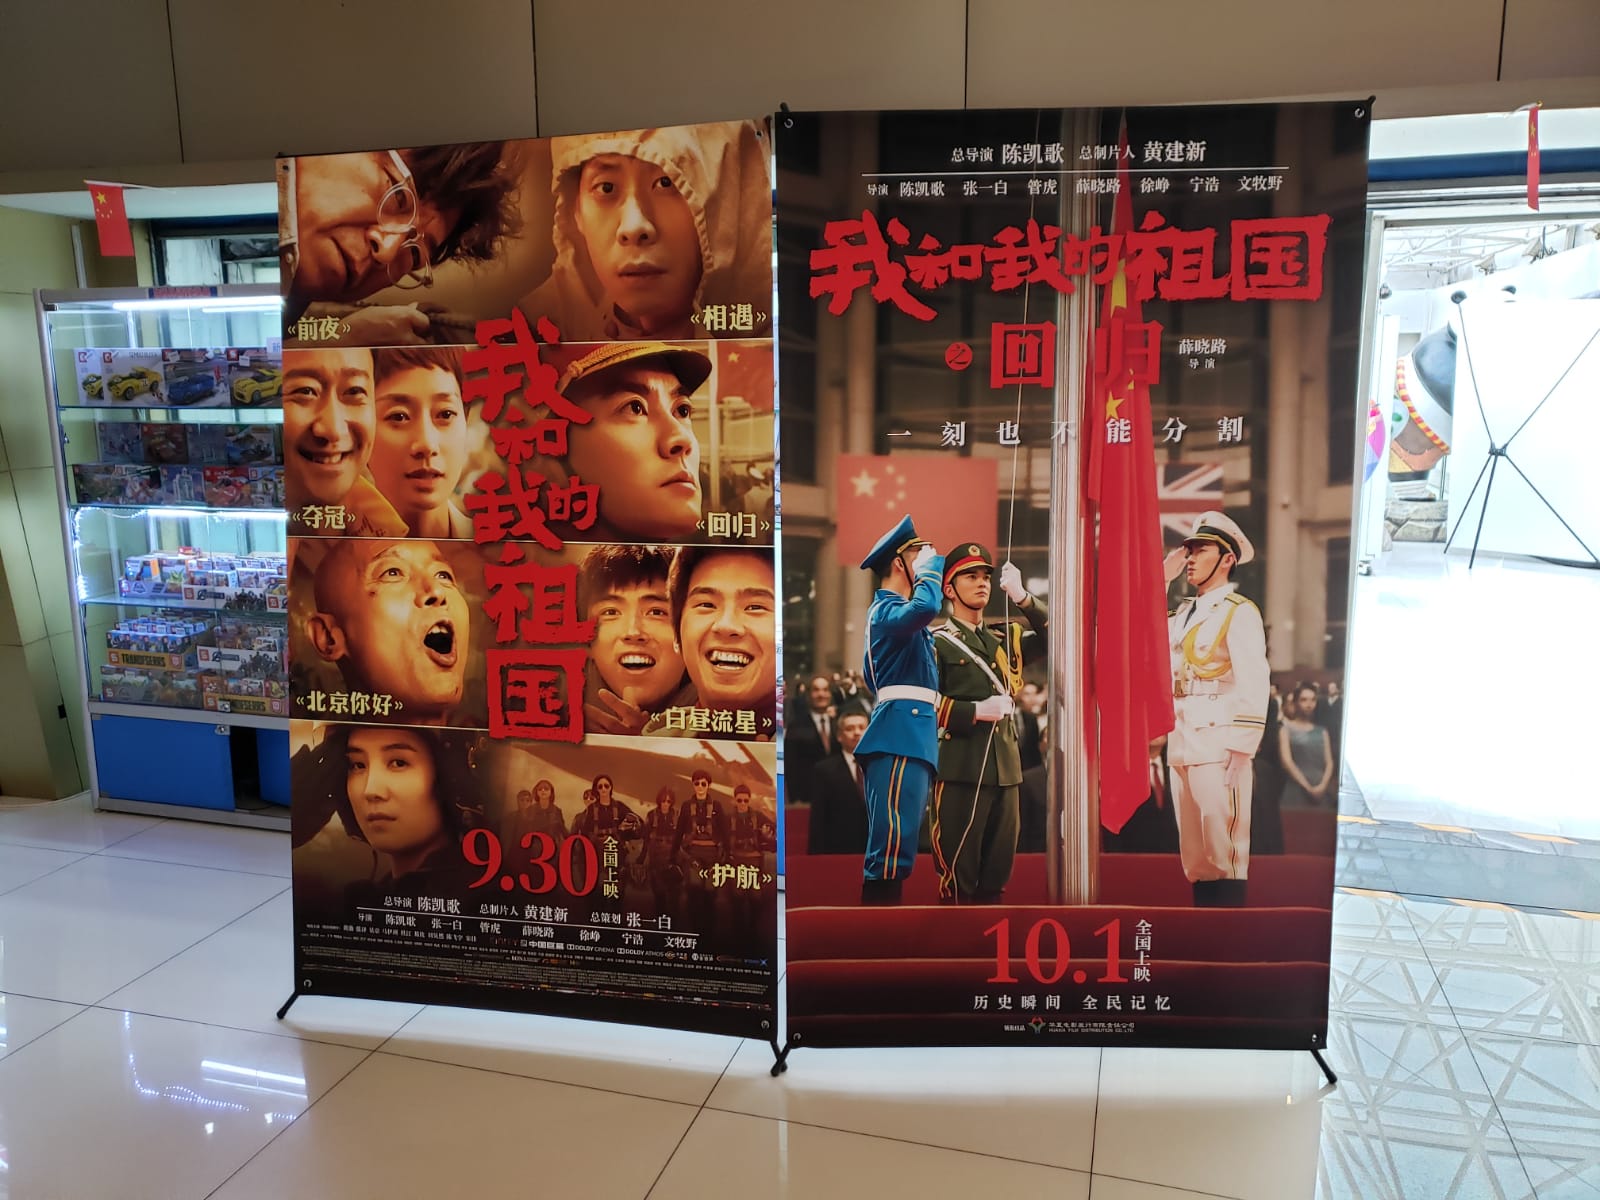 A mall cinema in Beijing is promoting two main films -- a propaganda film and one about Communist leader Mao Zedong.